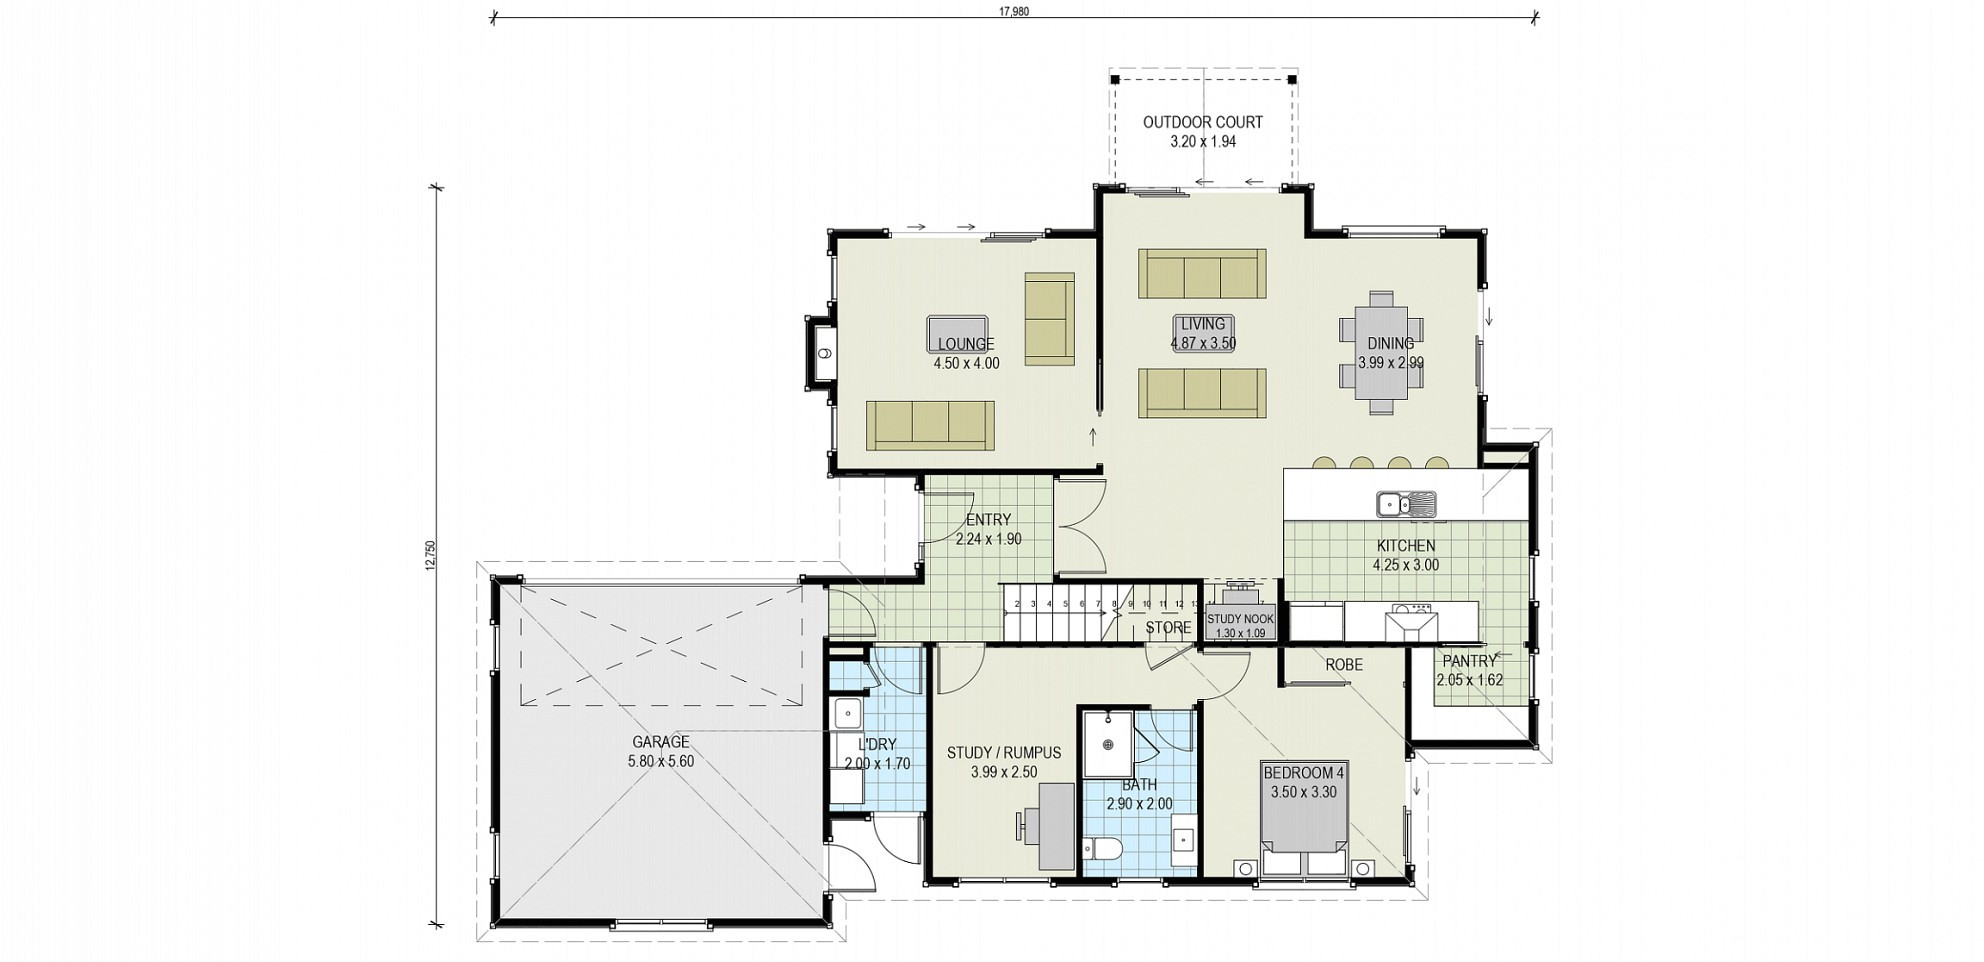 30 x 70 west facing house plans